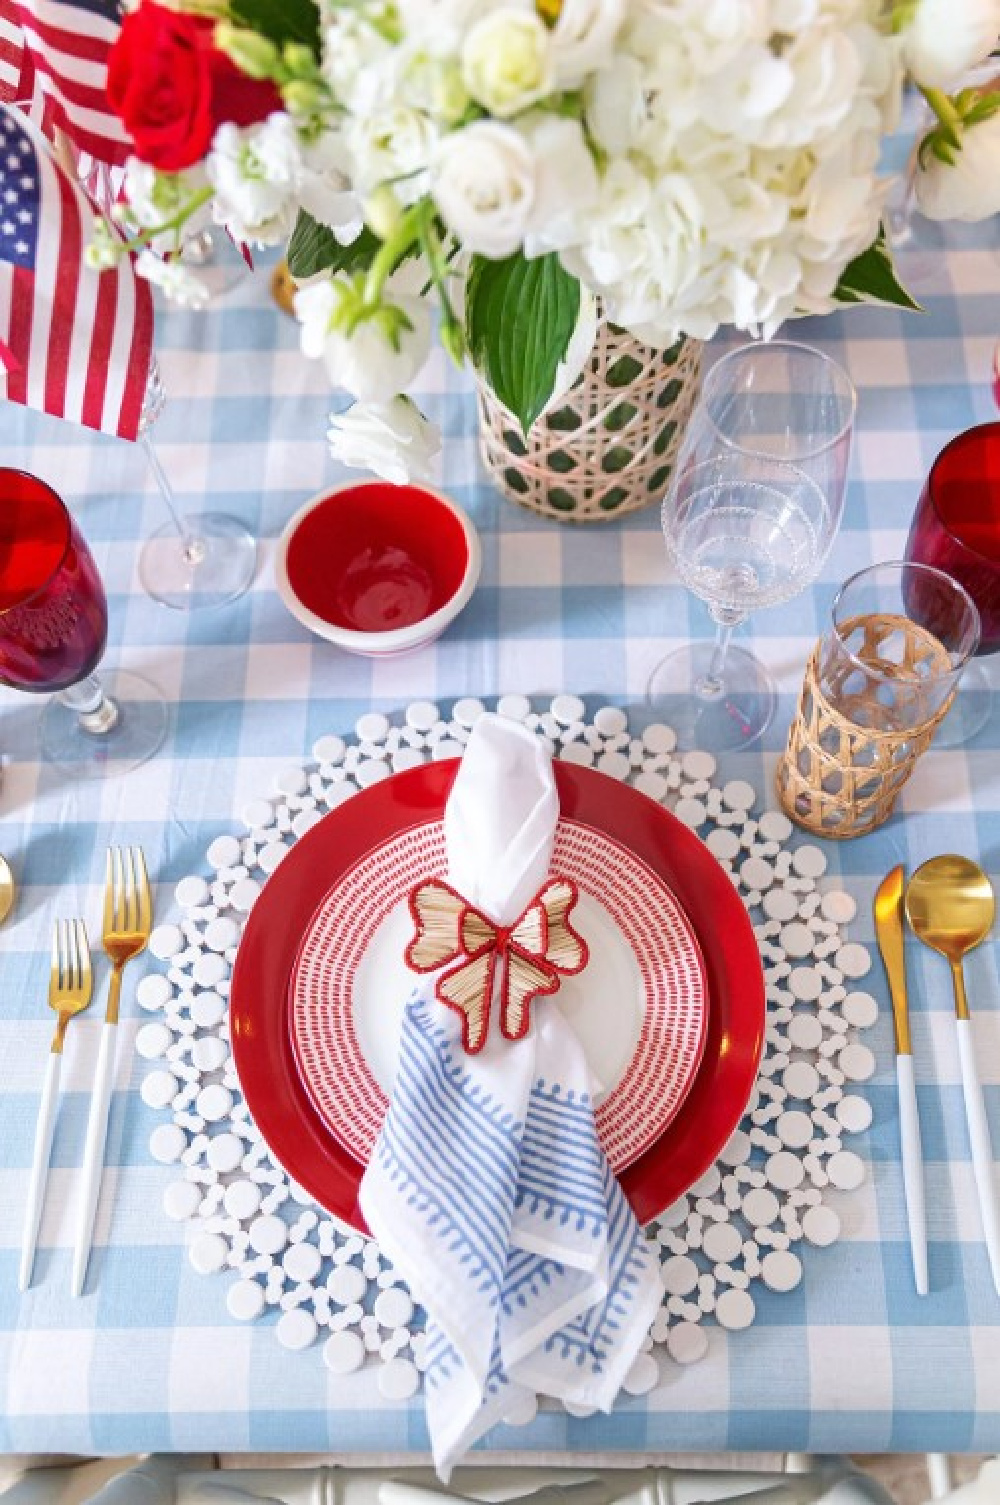 @pizzazzerie - 4th of July tablescape with light blue gingham tablecloth and classic coastal seagrass wrapped glassware. #4thofjulytablescape